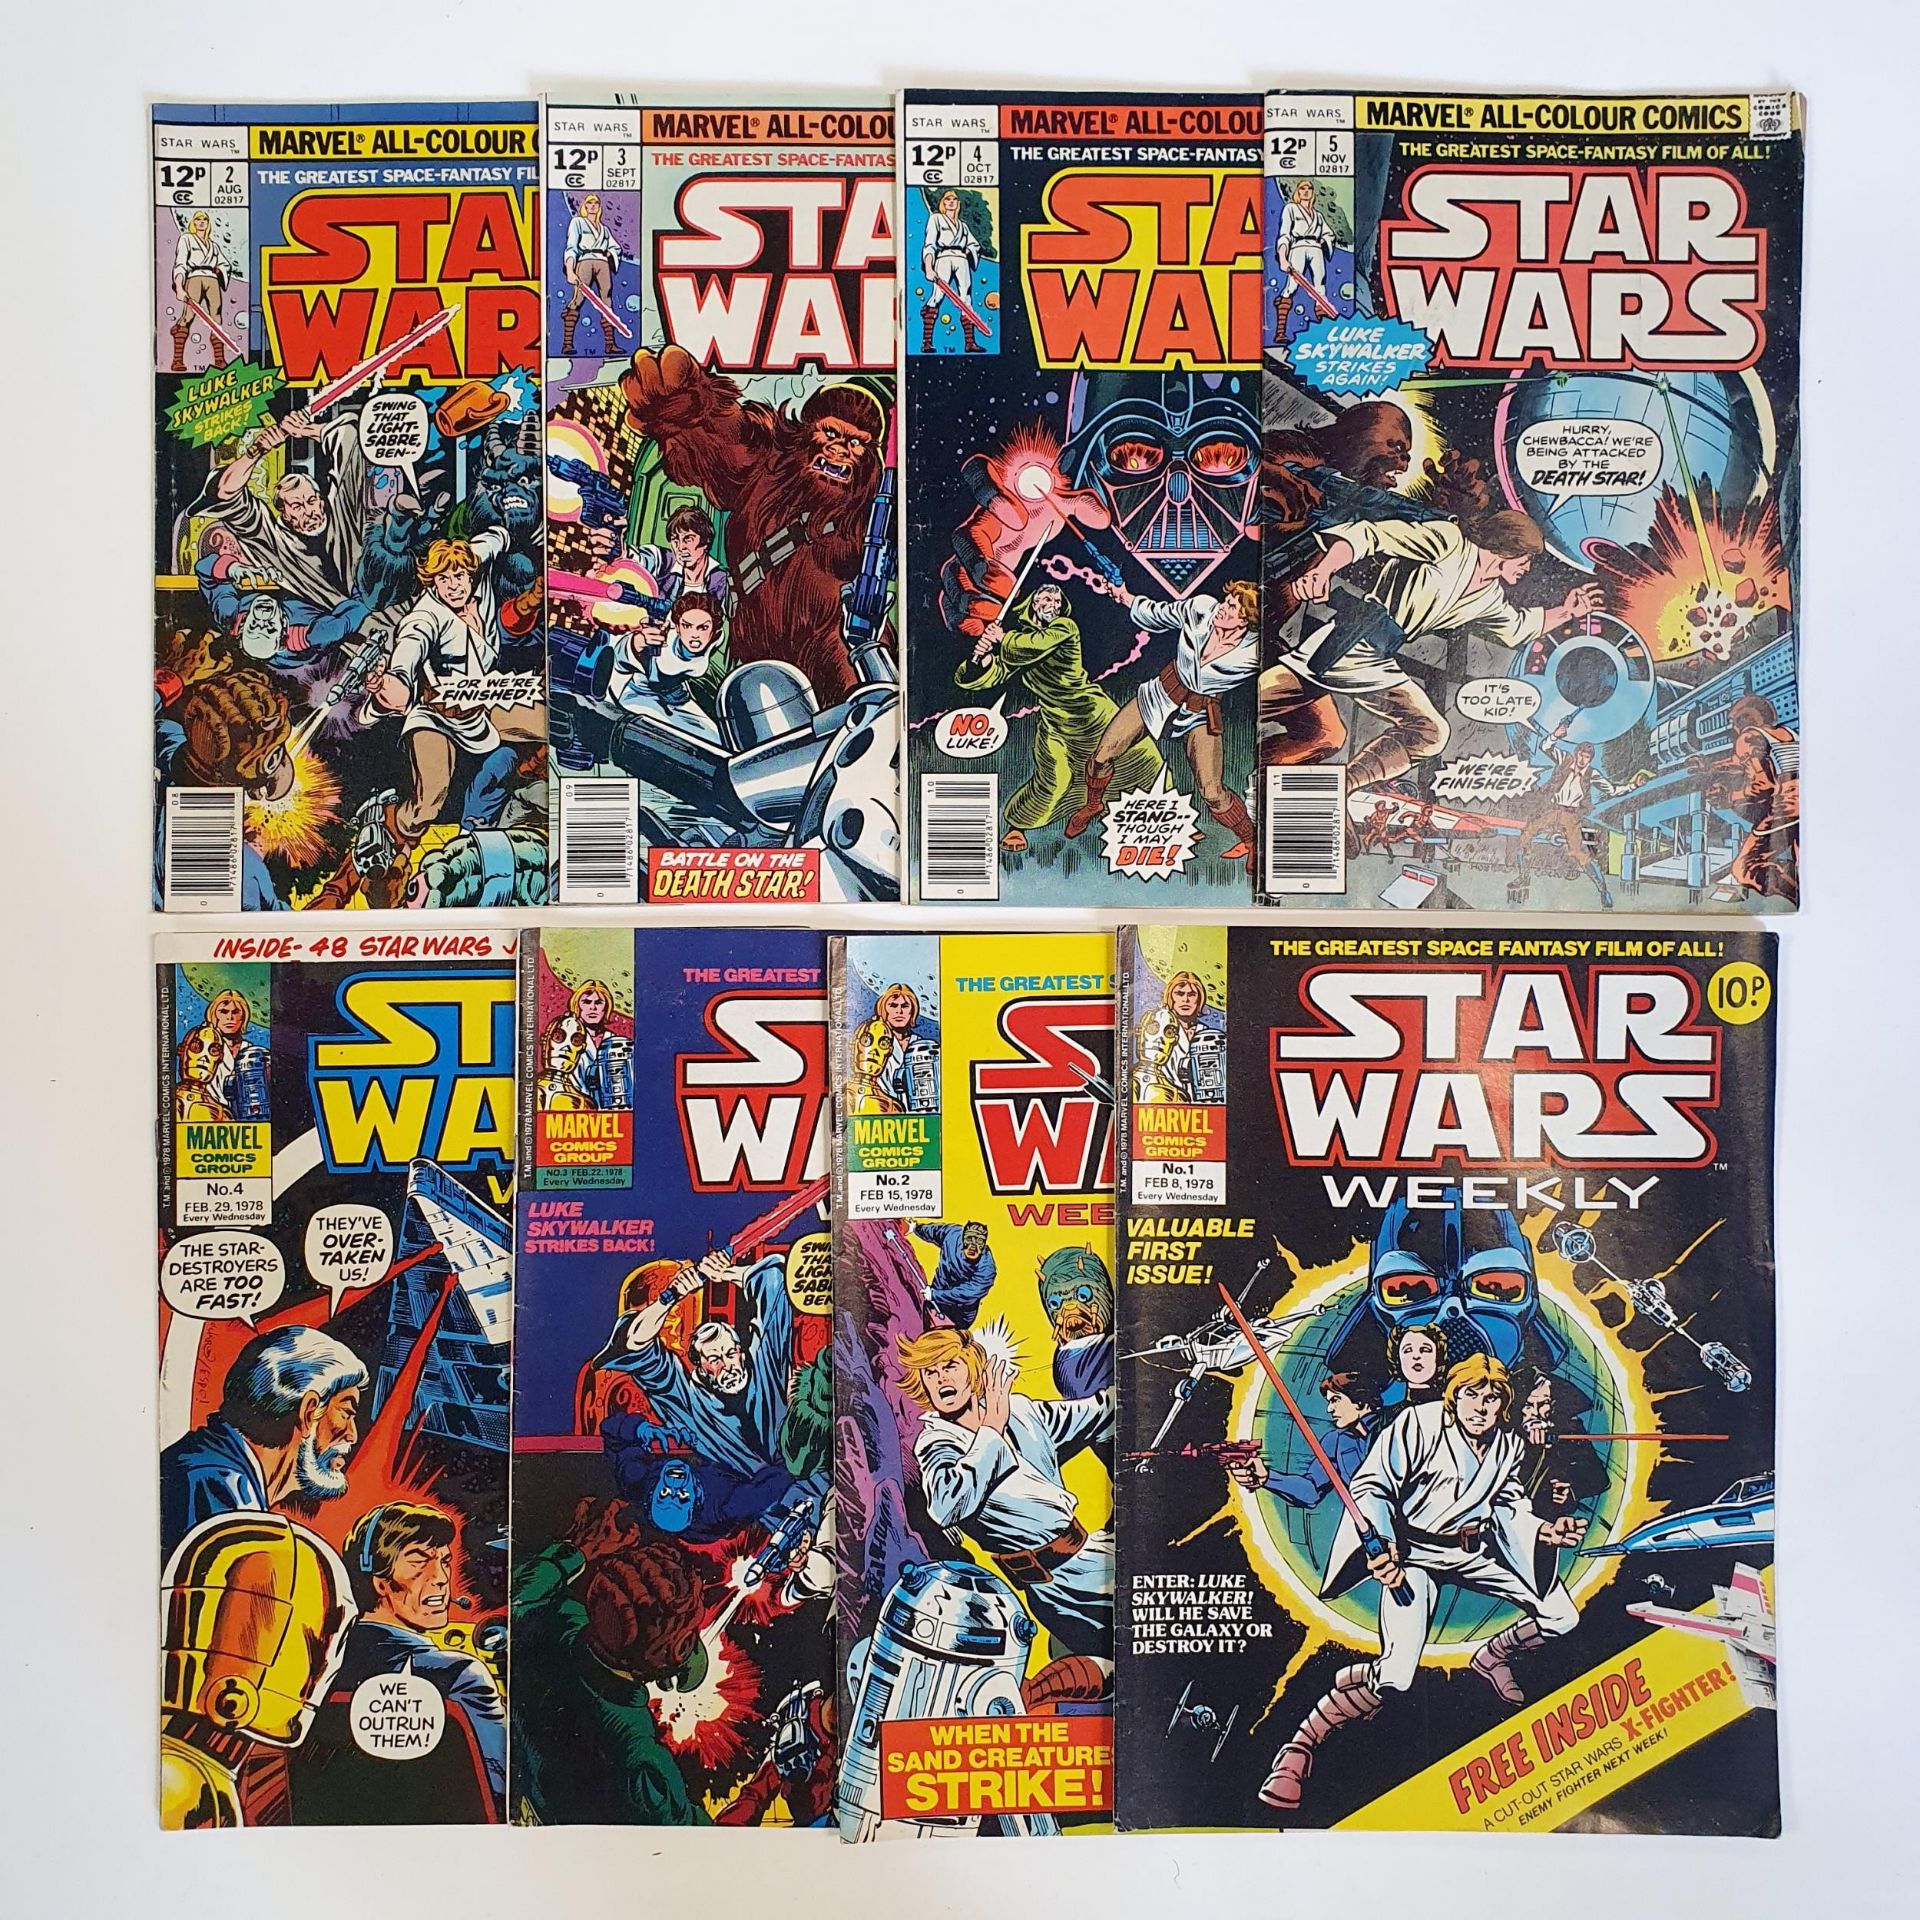 Marvel Comics, Star Wars Weekly, Nos. 1, 2 and 3, and assorted other Star Wars Weekly comics, and